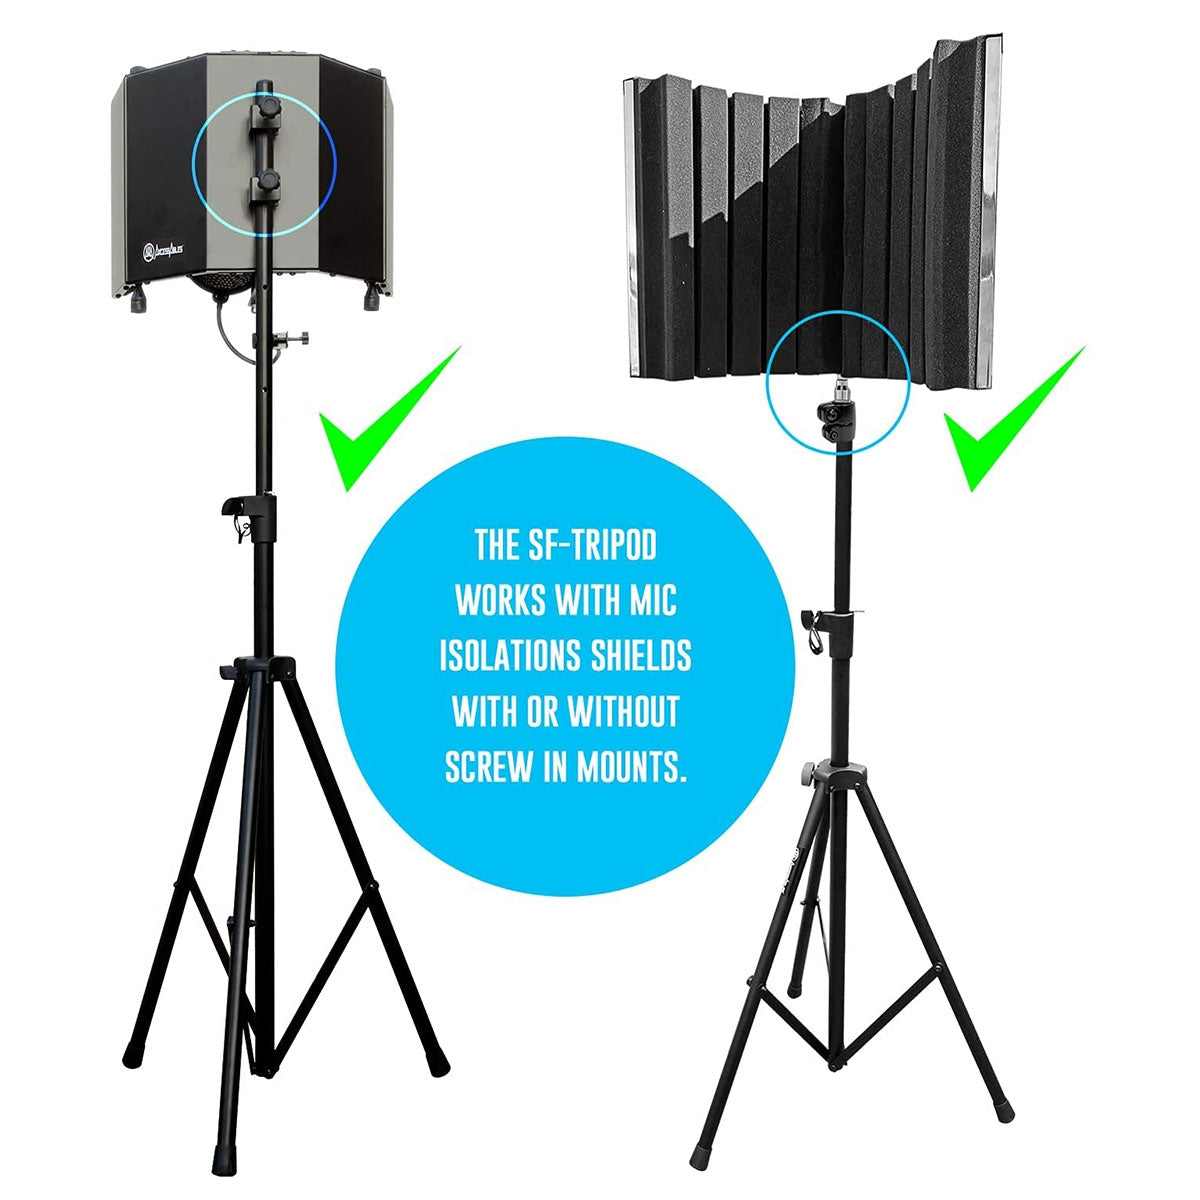 AxcessAbles Microphone Isolation Shield Stand Only. Single-Cast Stand 4ft4"- 6ft. For thread mount and back mount Vocal Isolation Shields. Mic Thread Adapters Included (SF-TRIPOD)